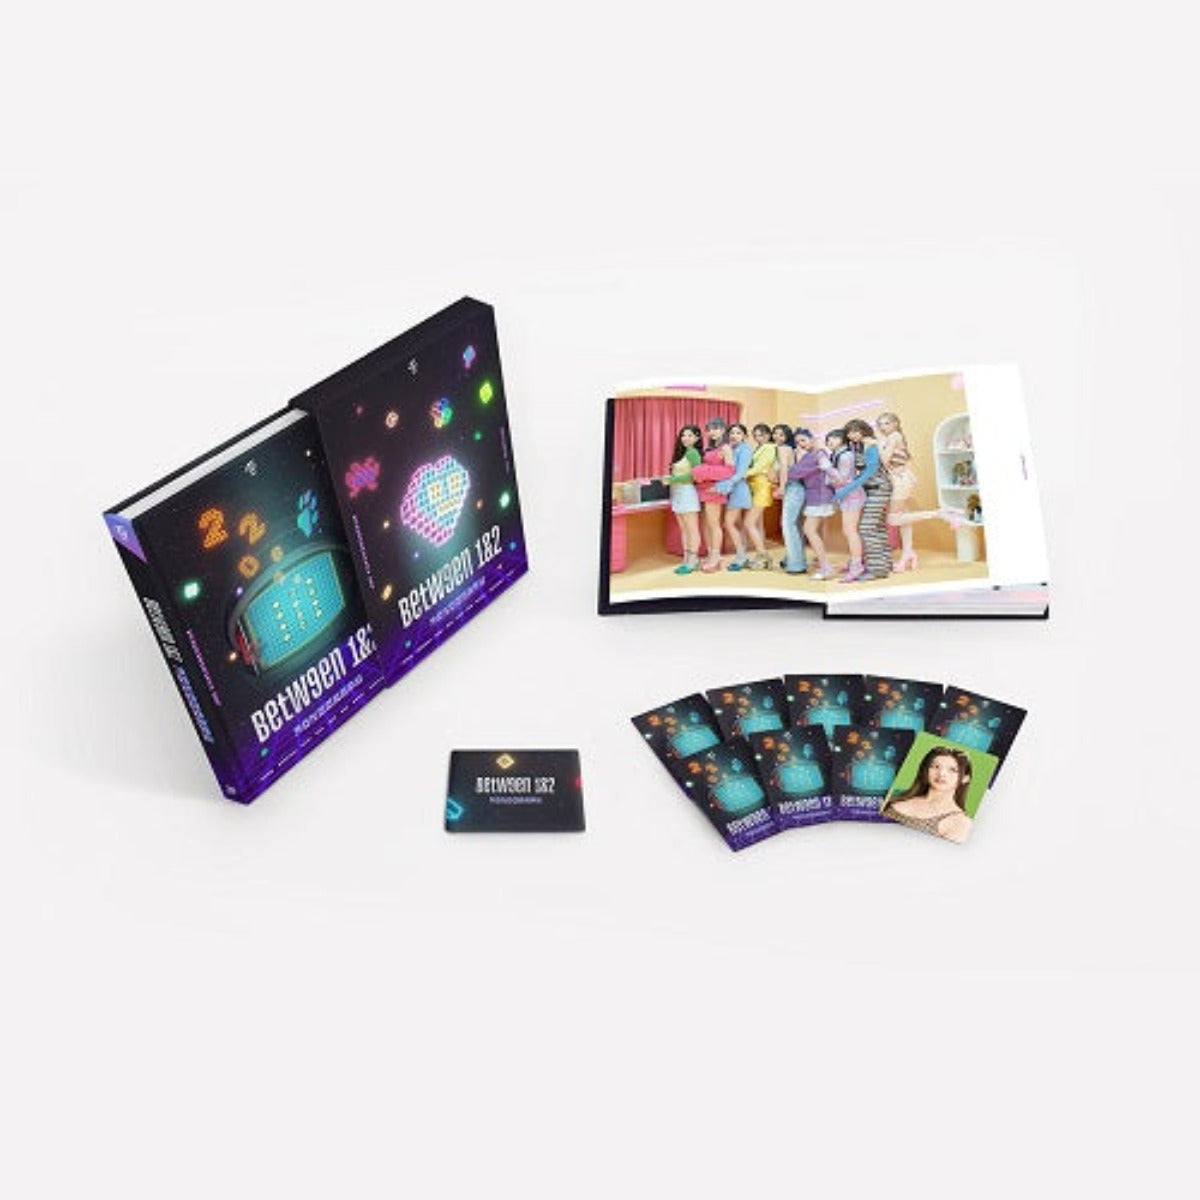 TWICE - MONOGRAPH BETWEEN 1&2 PHOTO BOOK LIMITED EDITION